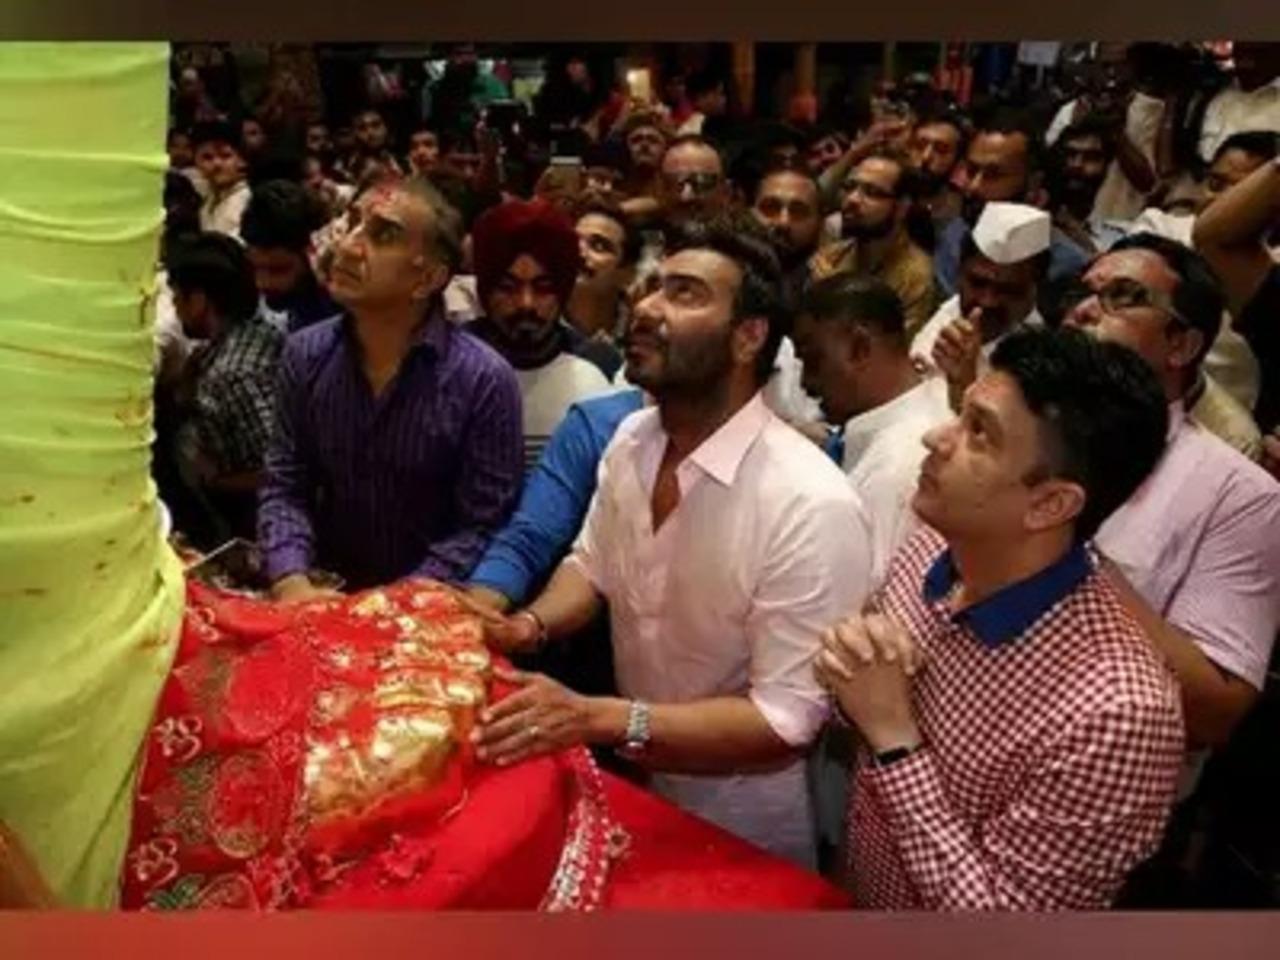 Ajay Devgn mostly visits the pandal every year to seek blessings from the Lord of Wisdom. He's a devotee of Lord Shiv and Lord Ganesh